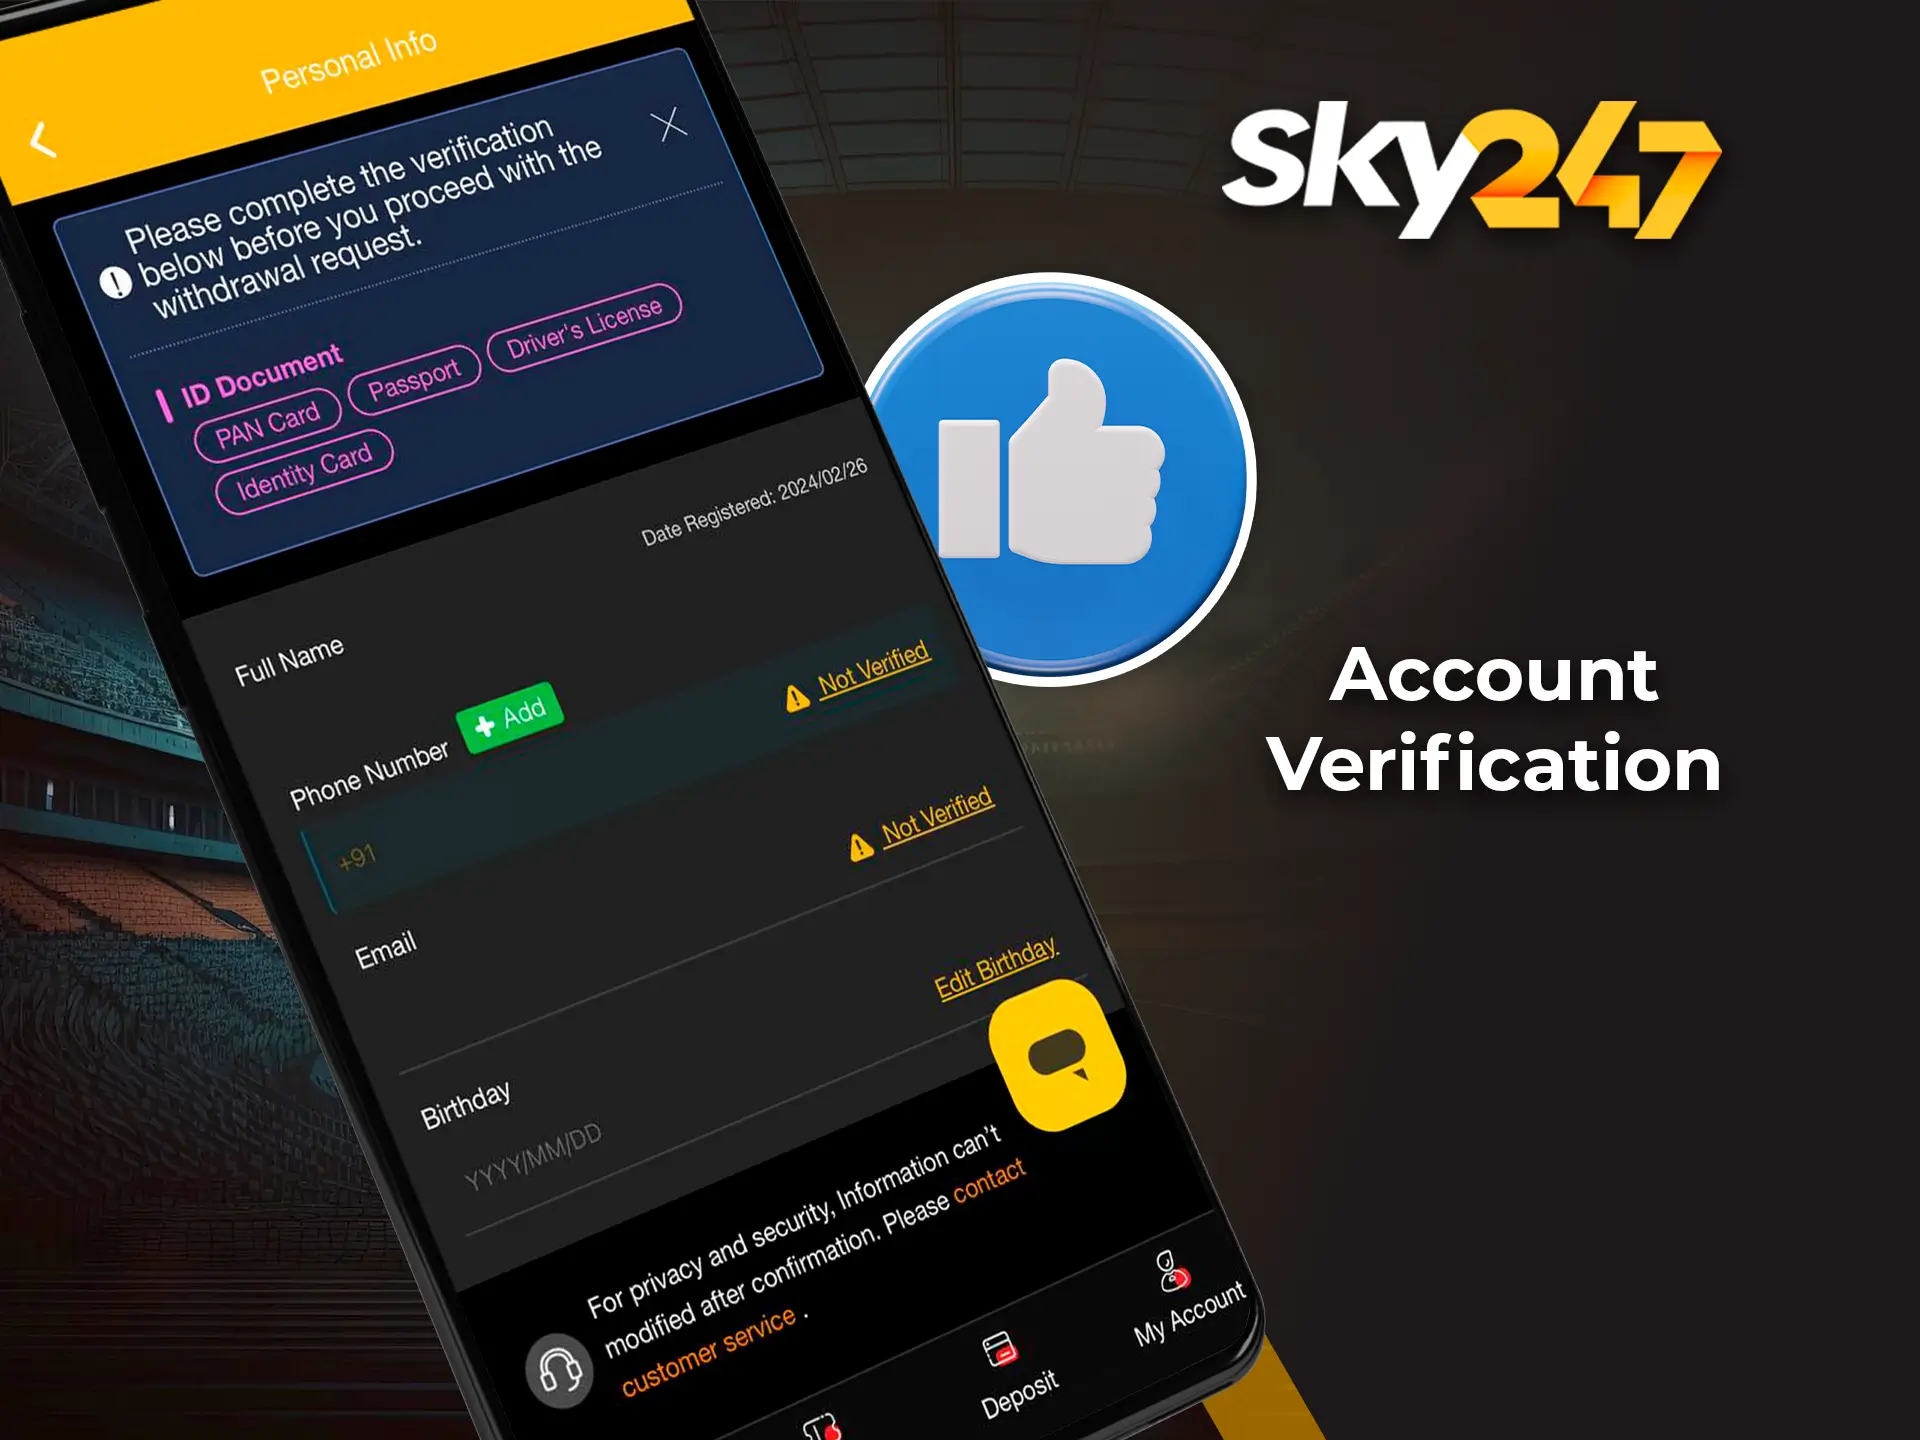 Confirm your personal account to get the full functionality of the Sky247 website.